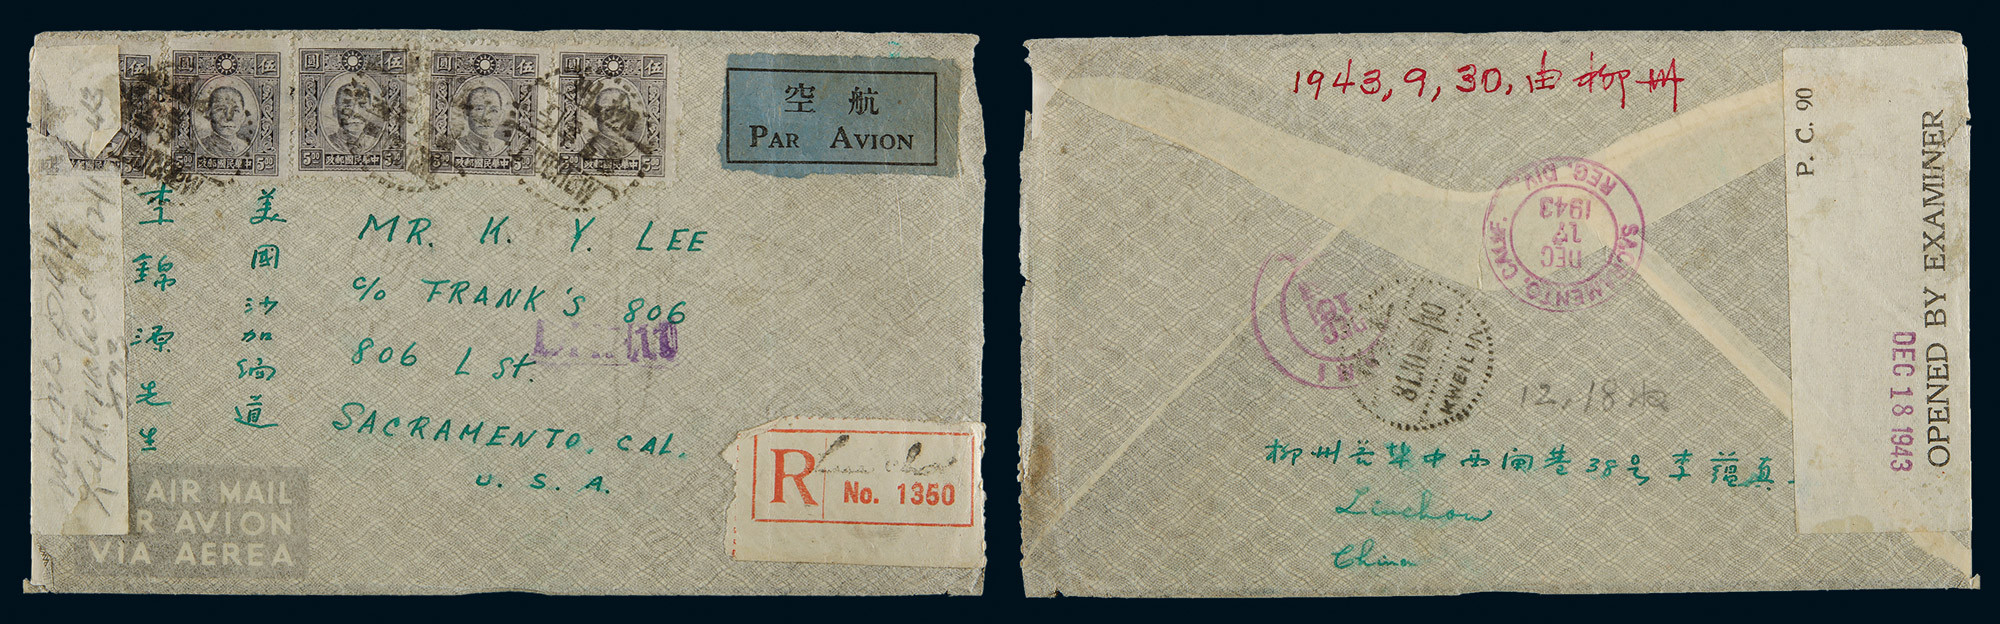 1943 registered airmail cover sent from Liuzhou to USA，Nice condition